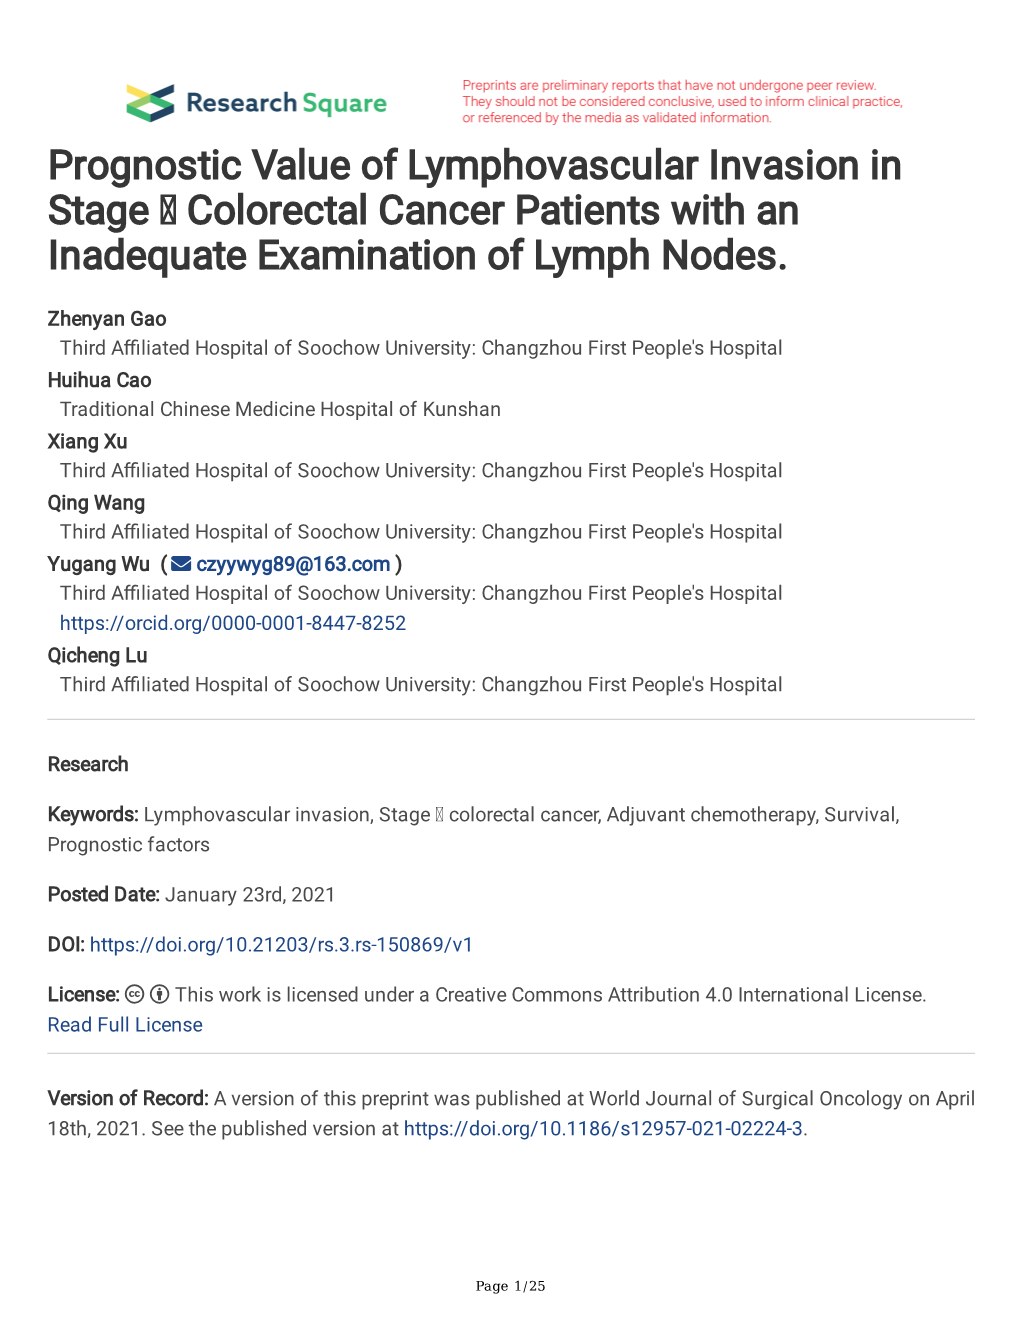 Prognostic Value of Lymphovascular Invasion in Stage Colorectal